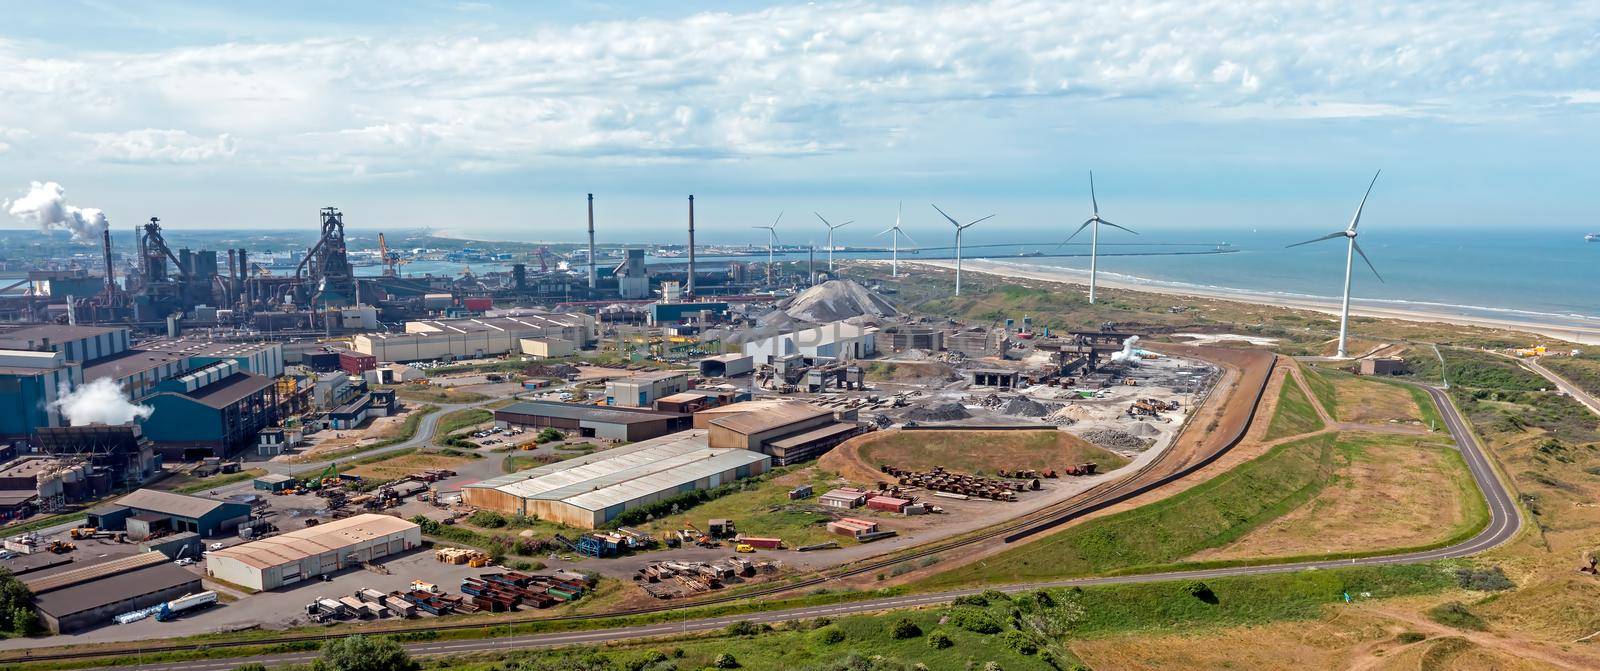 Aeria panorama from industry in IJmuiden in the Netherlands by devy